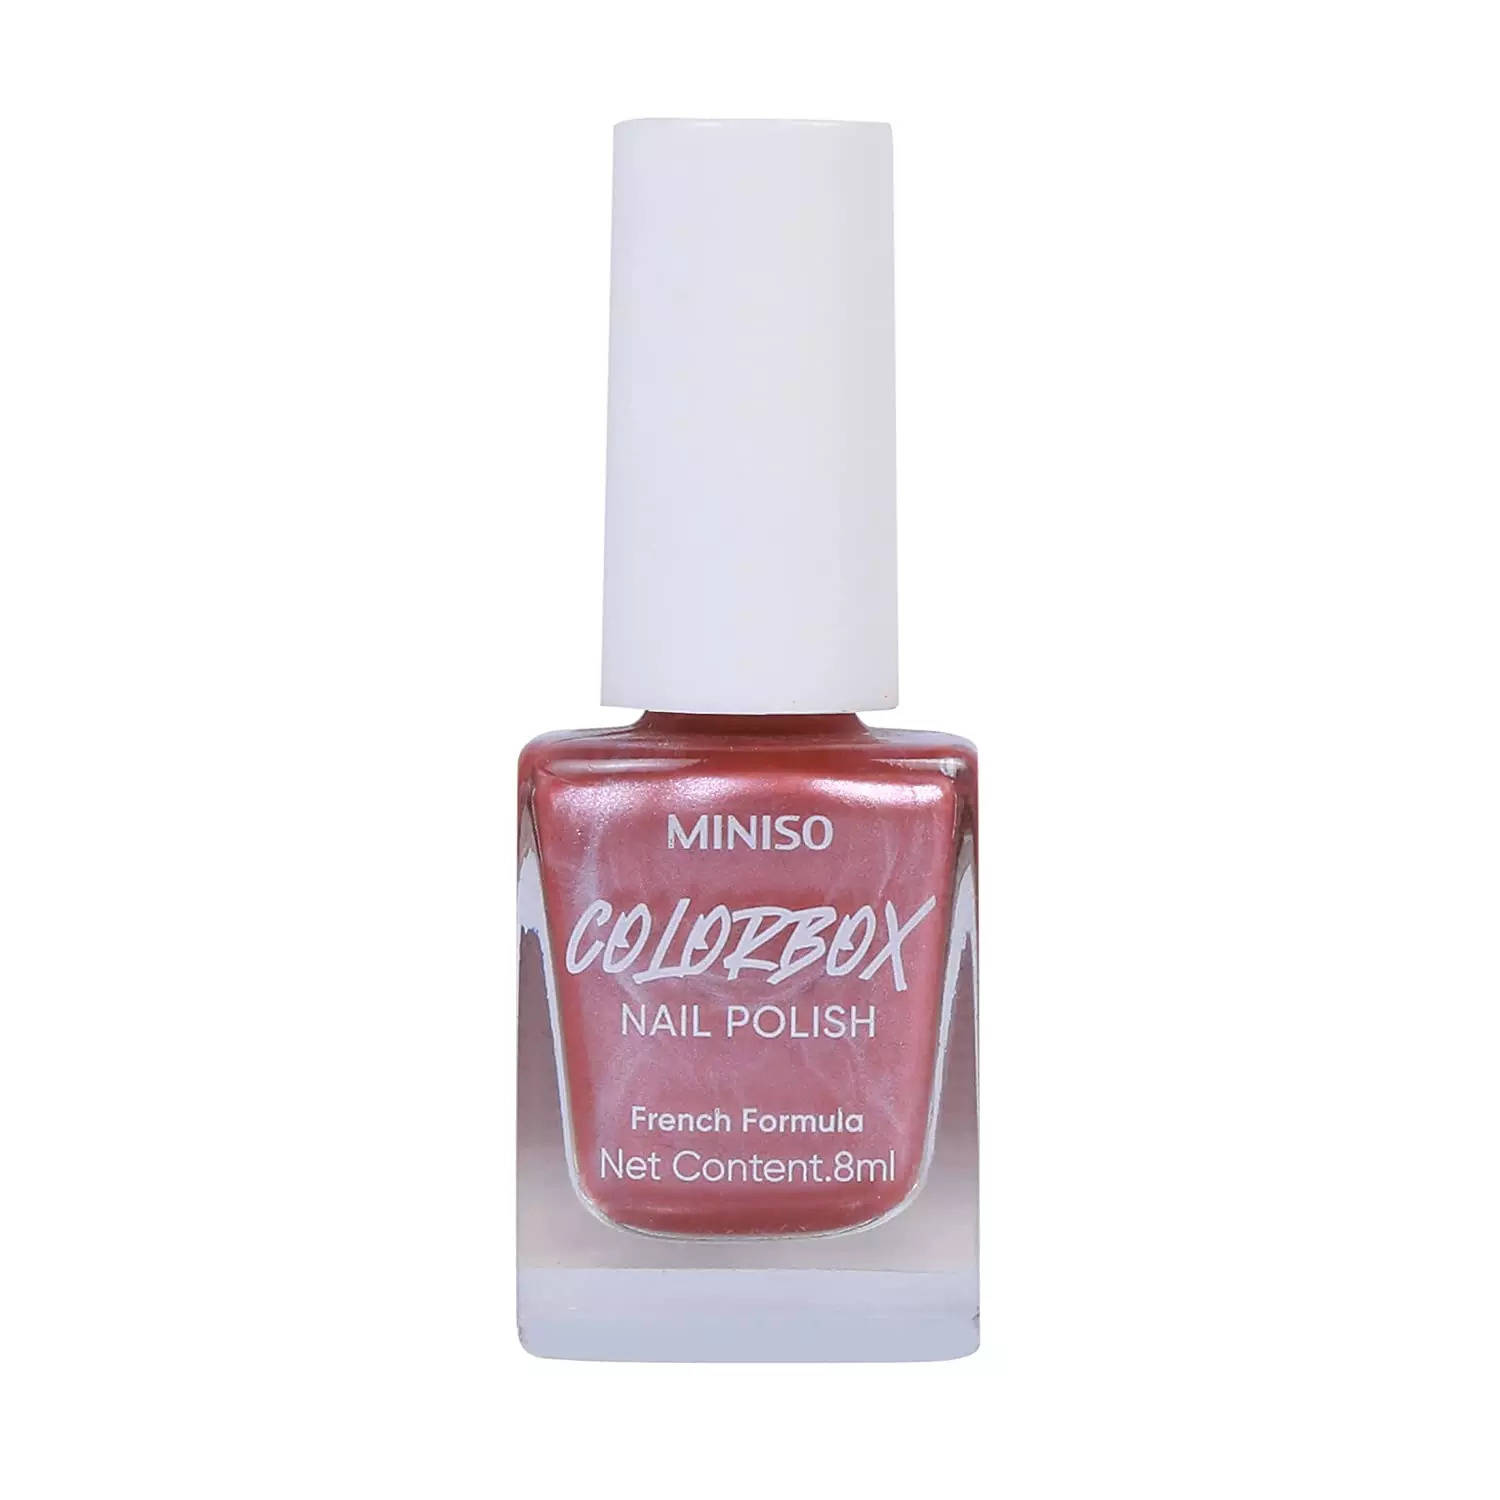 COLORESSENCE Regular Nail Paint Punch - Price in India, Buy COLORESSENCE  Regular Nail Paint Punch Online In India, Reviews, Ratings & Features |  Flipkart.com